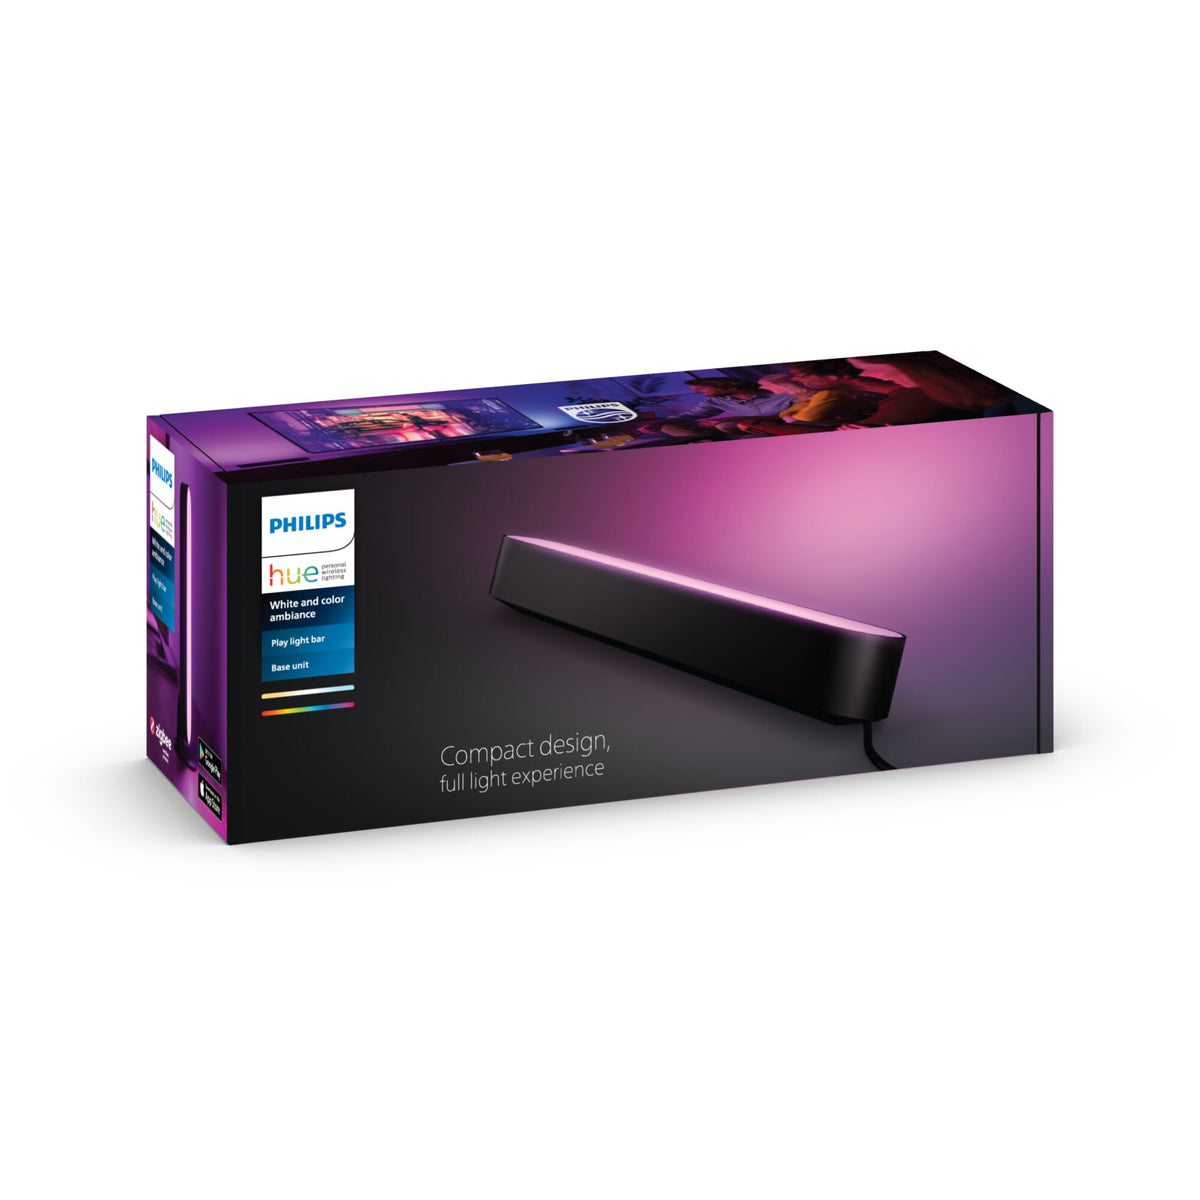 Philips Hue Play light bar in Black - White and colour ambience (Pack of 1)